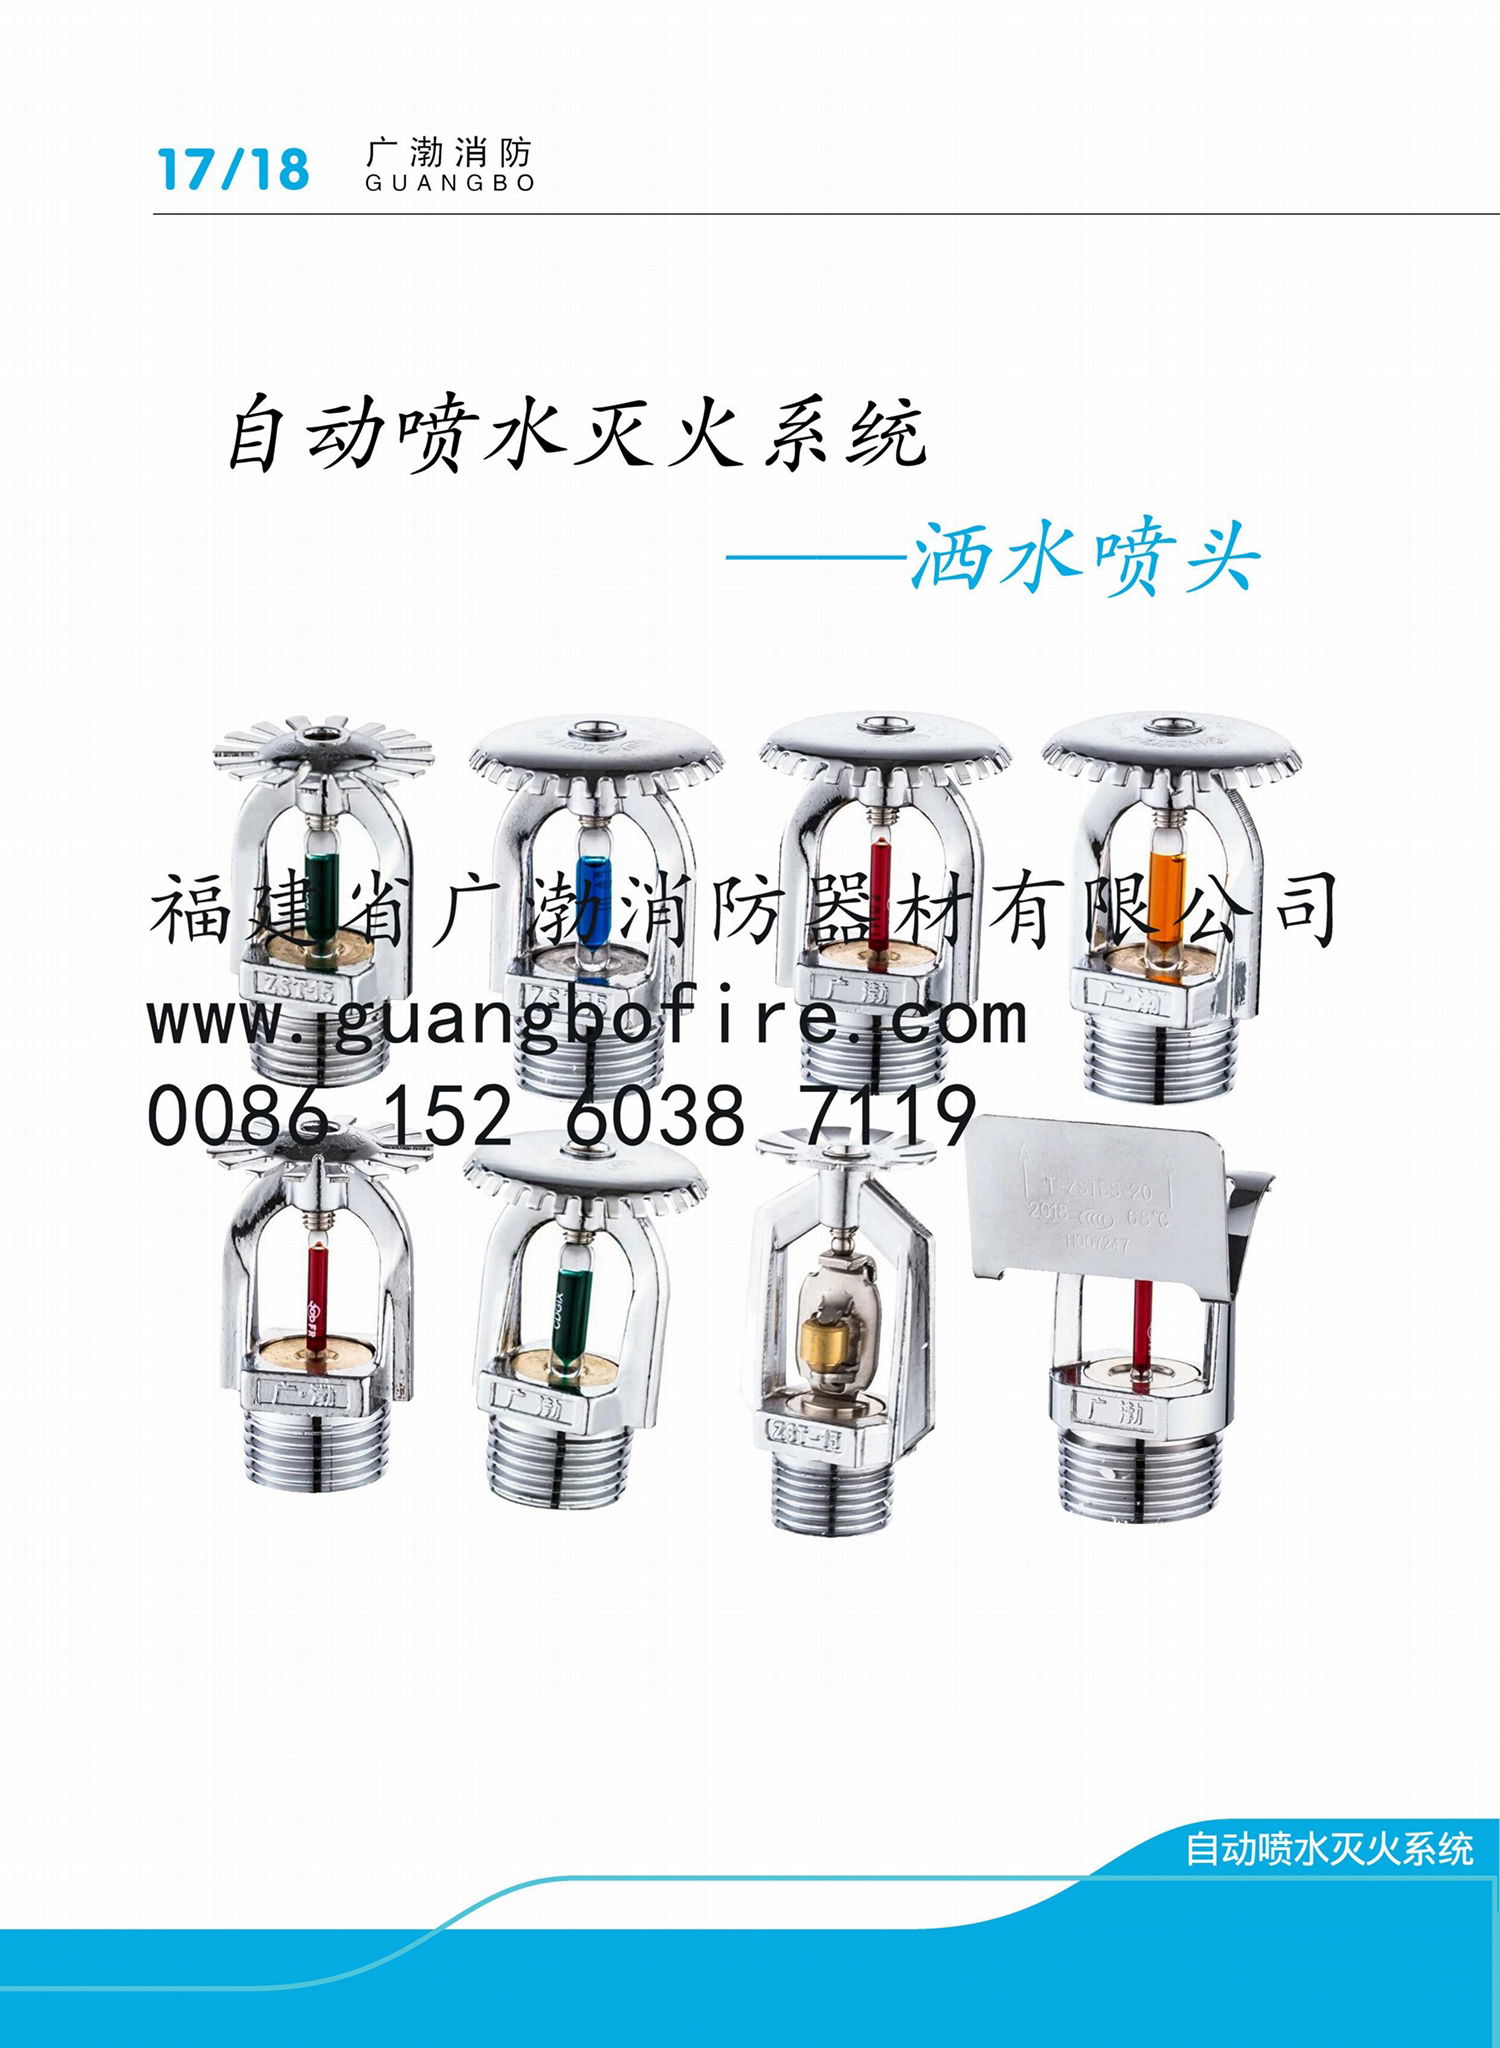 Fire Sprinkler Pendent Upright Sidewall Concealed Type Fujian Guangbo Fighting